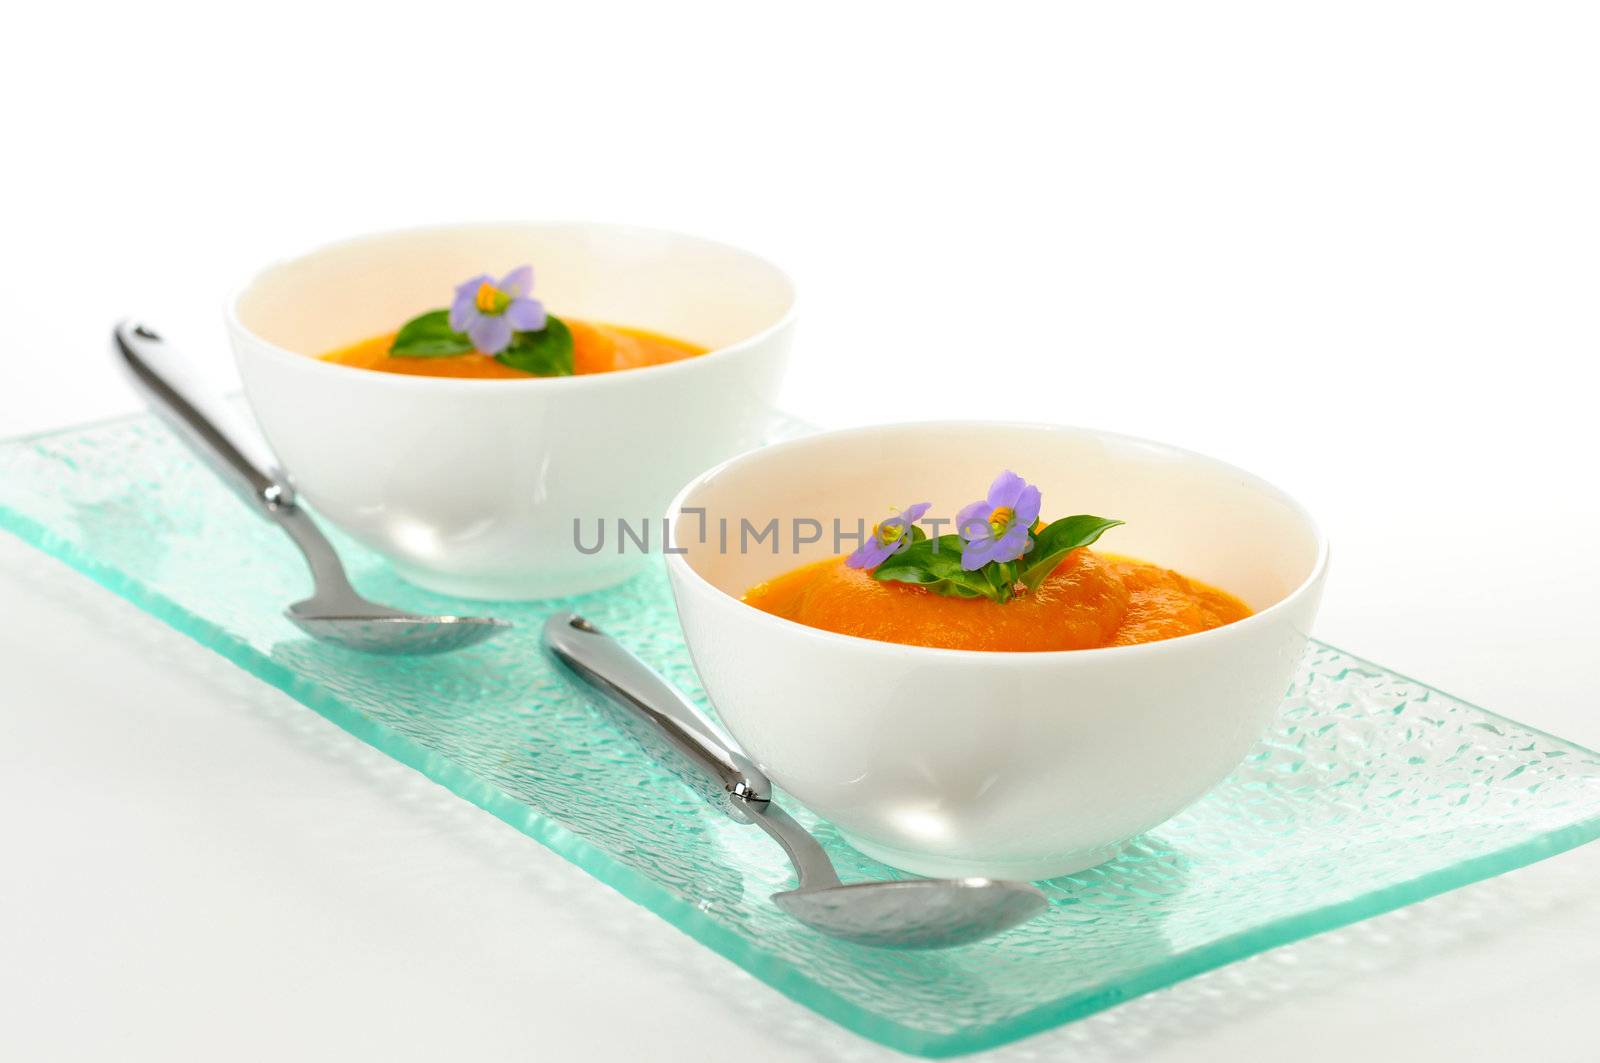 Carrot Soup by billberryphotography